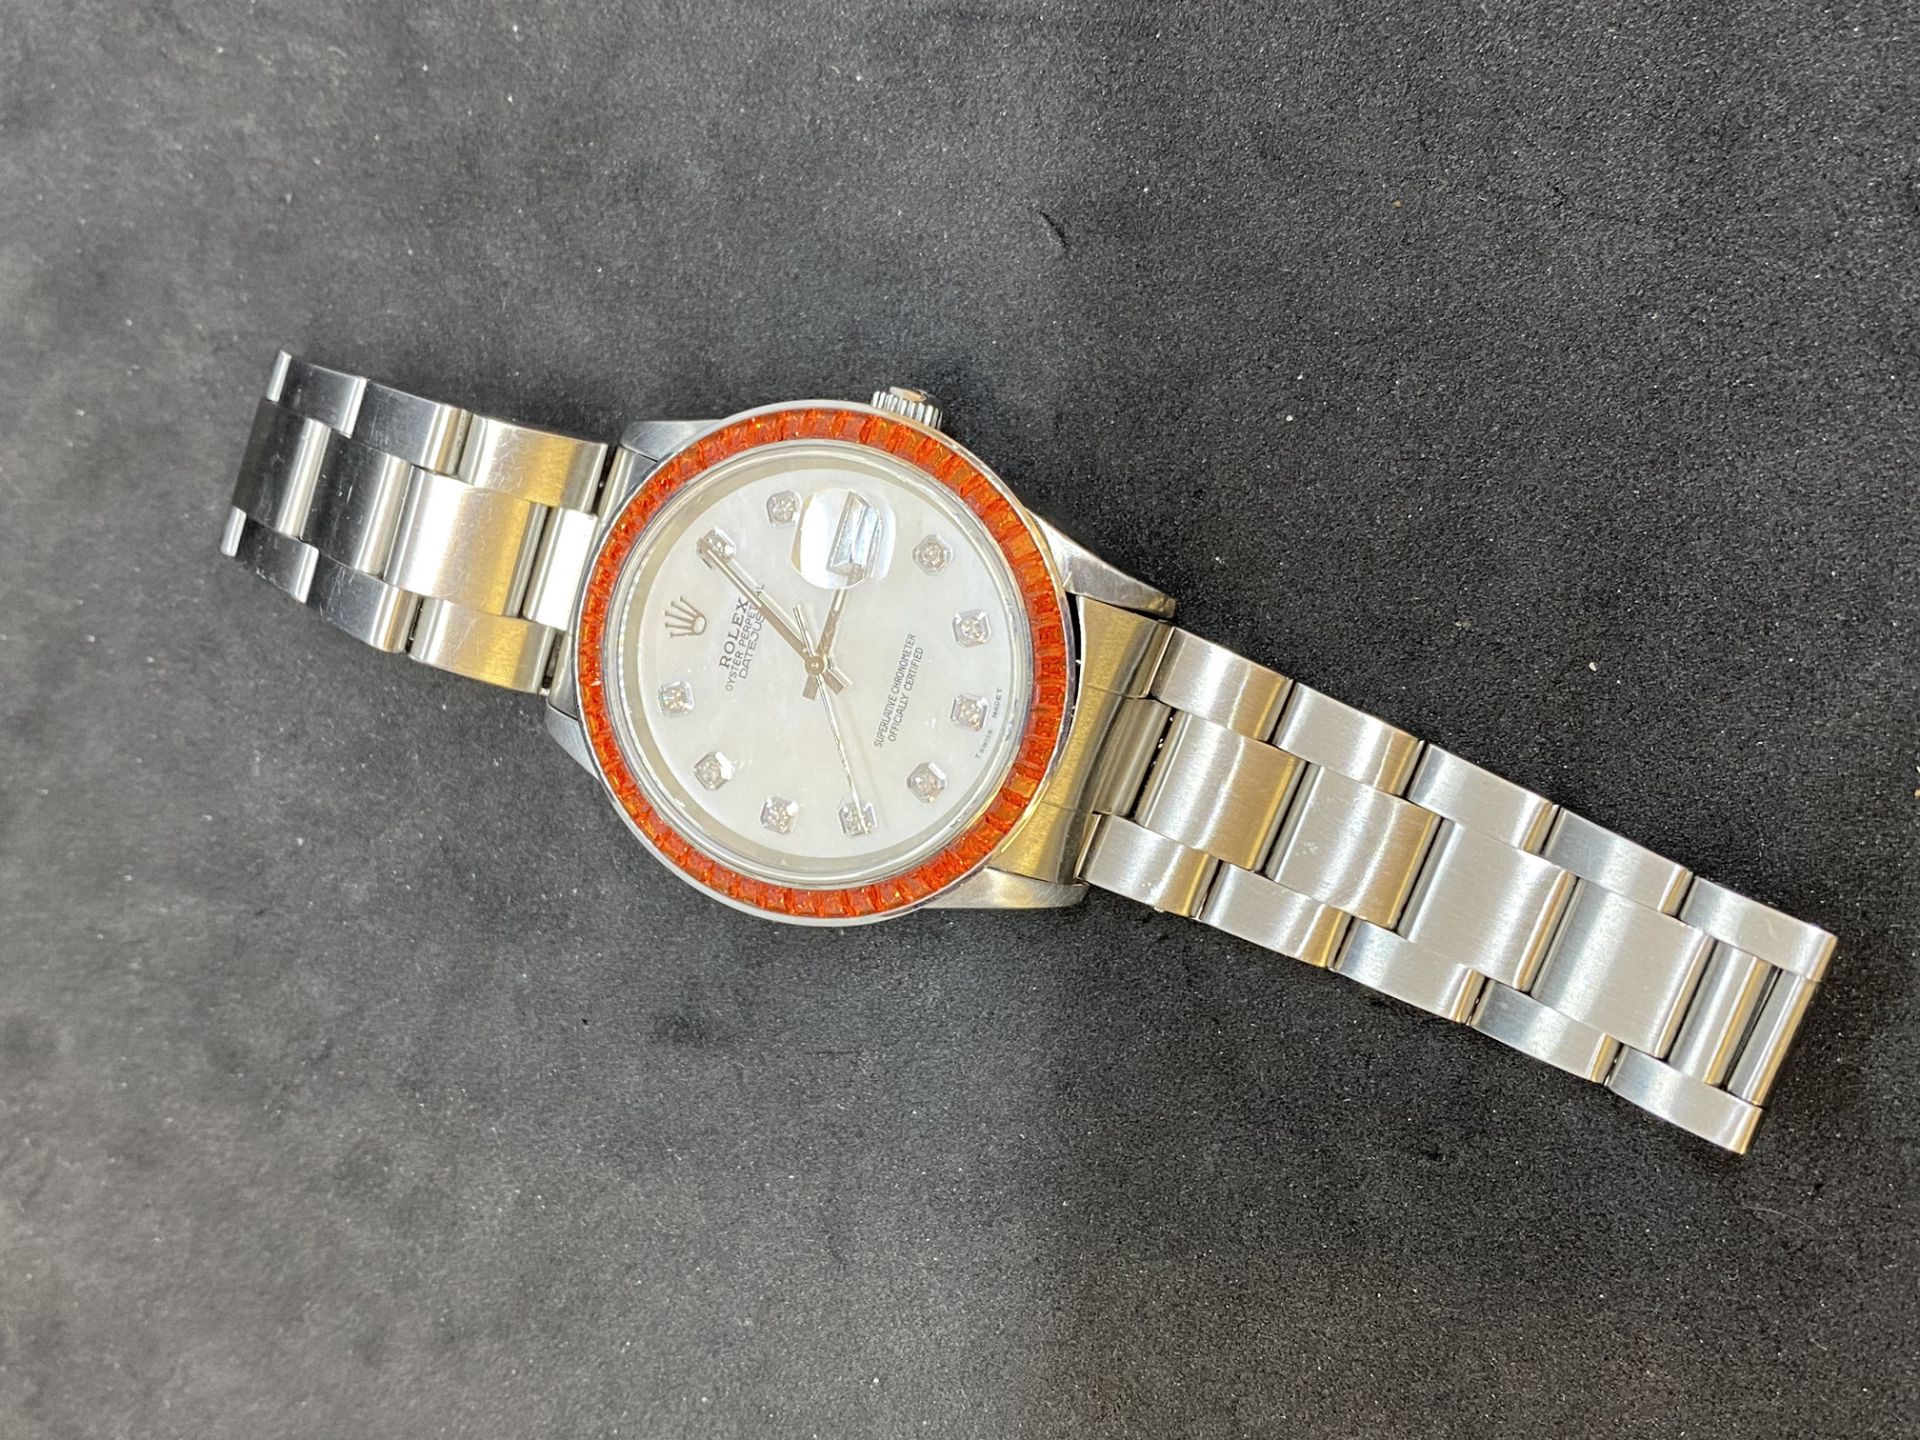 STAINLESS STEEL AUTOMATIC ROLEX WITH DIAMOND DOT DIAL & ORANGE BEZEL - Image 9 of 10